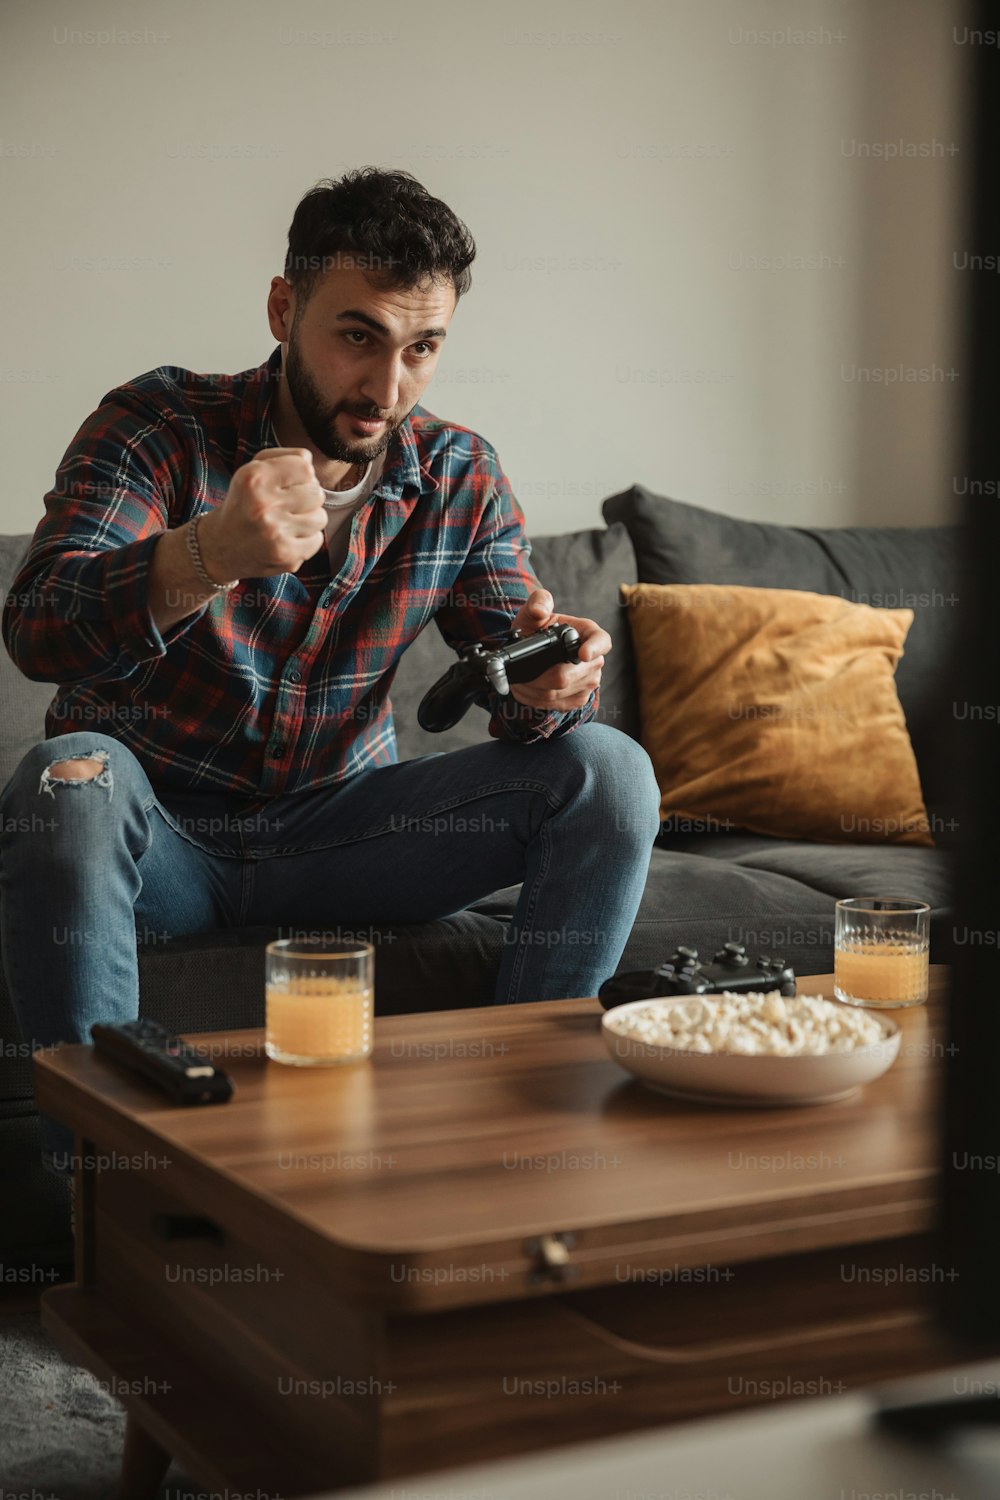 a man sitting on a couch holding a remote control